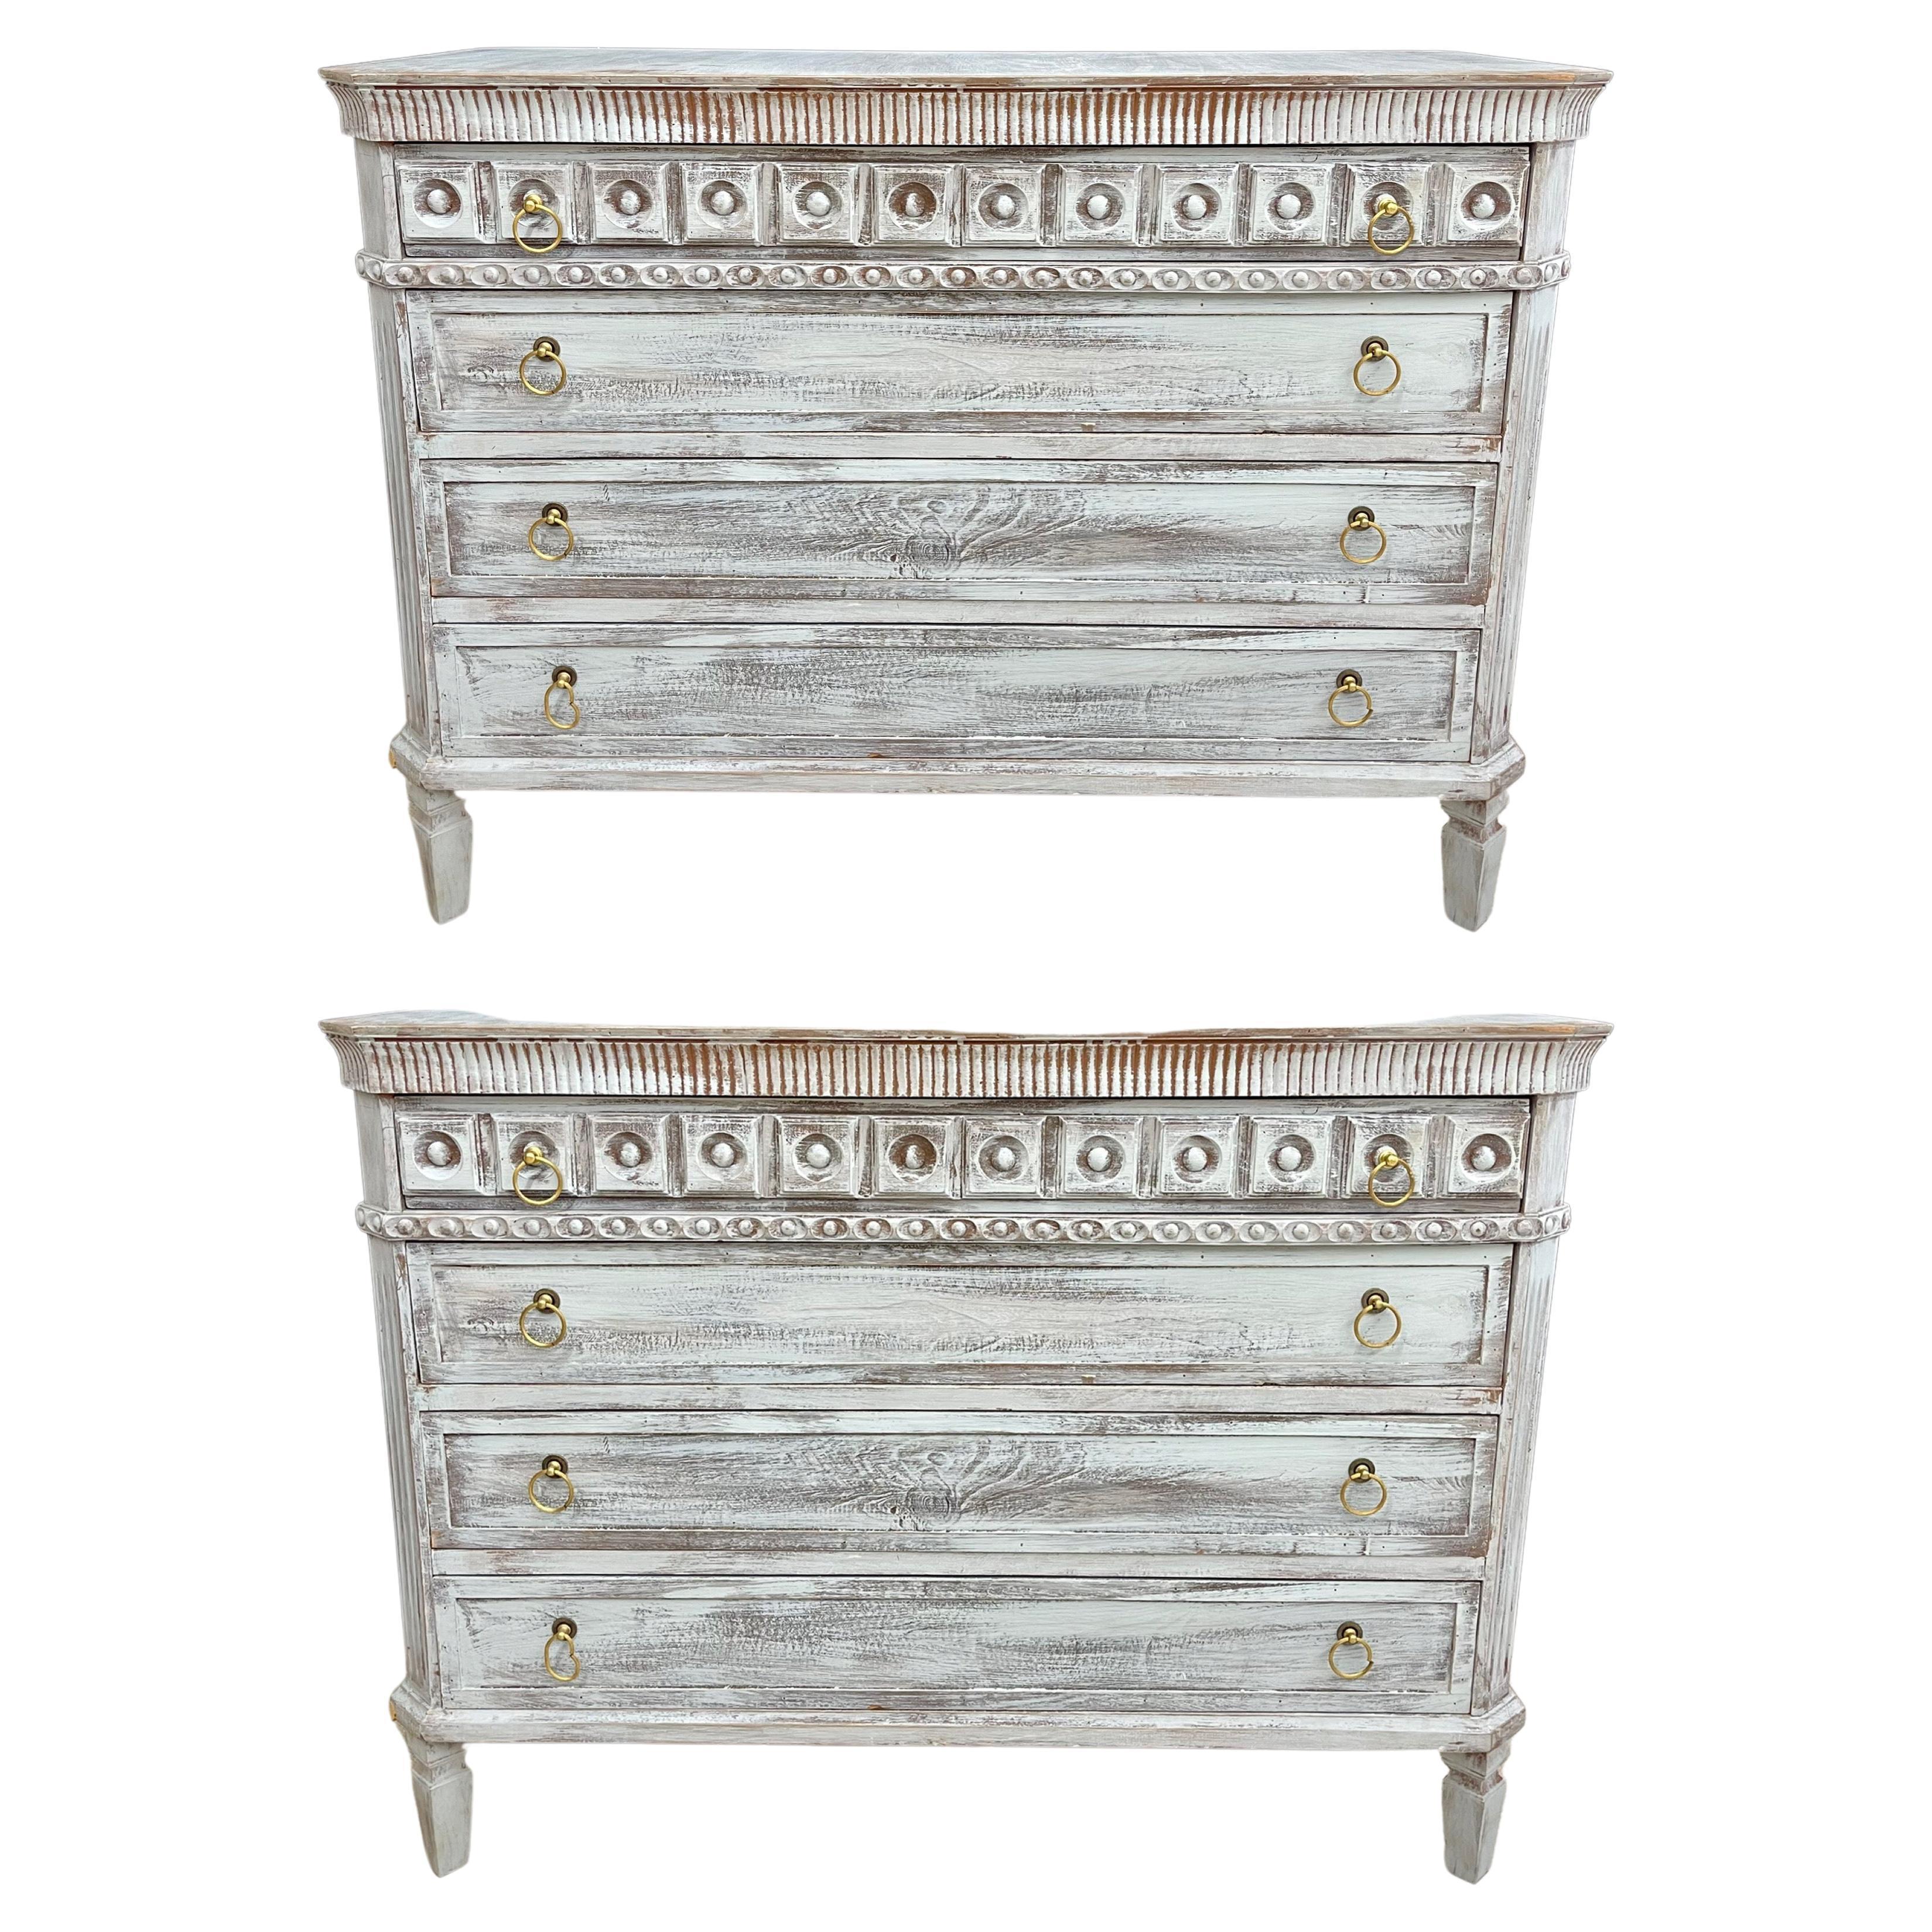 Pair of Swedish style three-drawer commodes or nightstands each on square tapering legs with brass drawer pulls. Having dental molding style carvings. Lovely tan with gray distress paint.